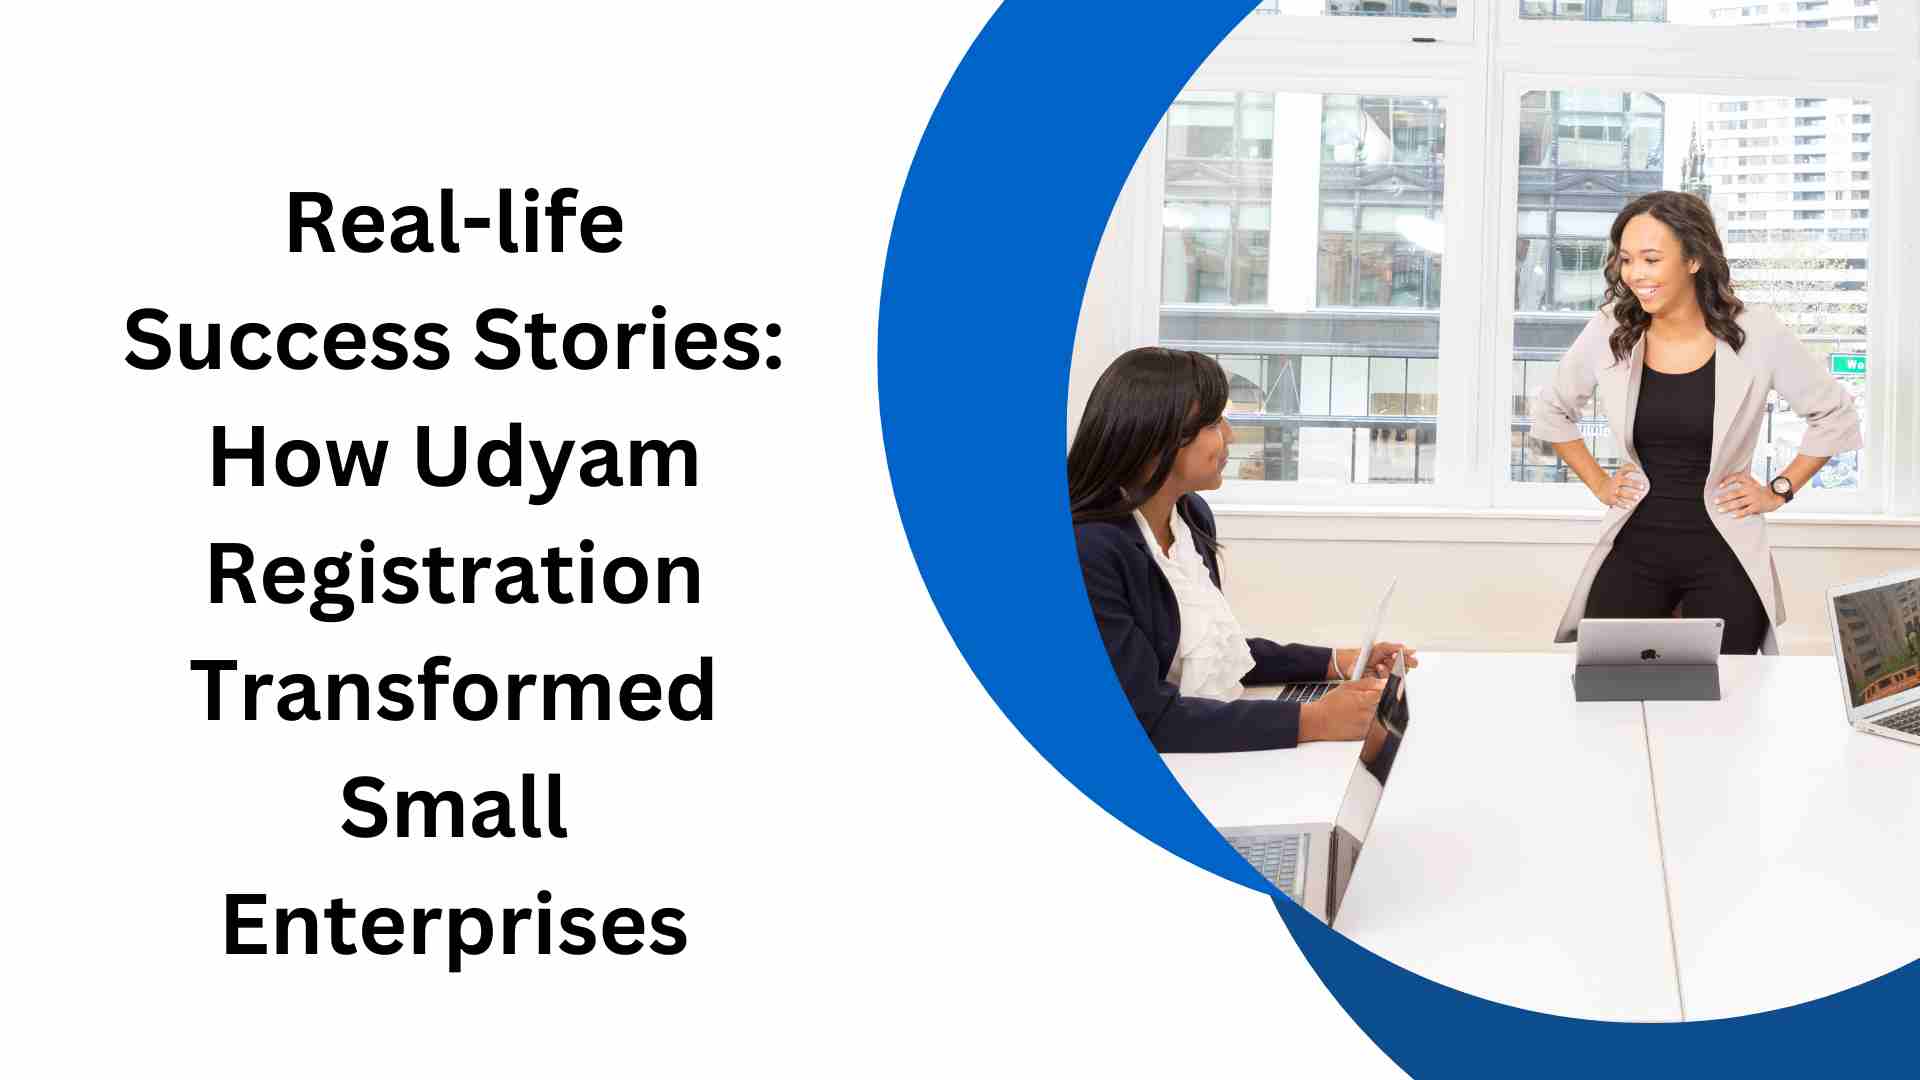 Real-life Success Stories How Udyam Registration Transformed Small Enterprises